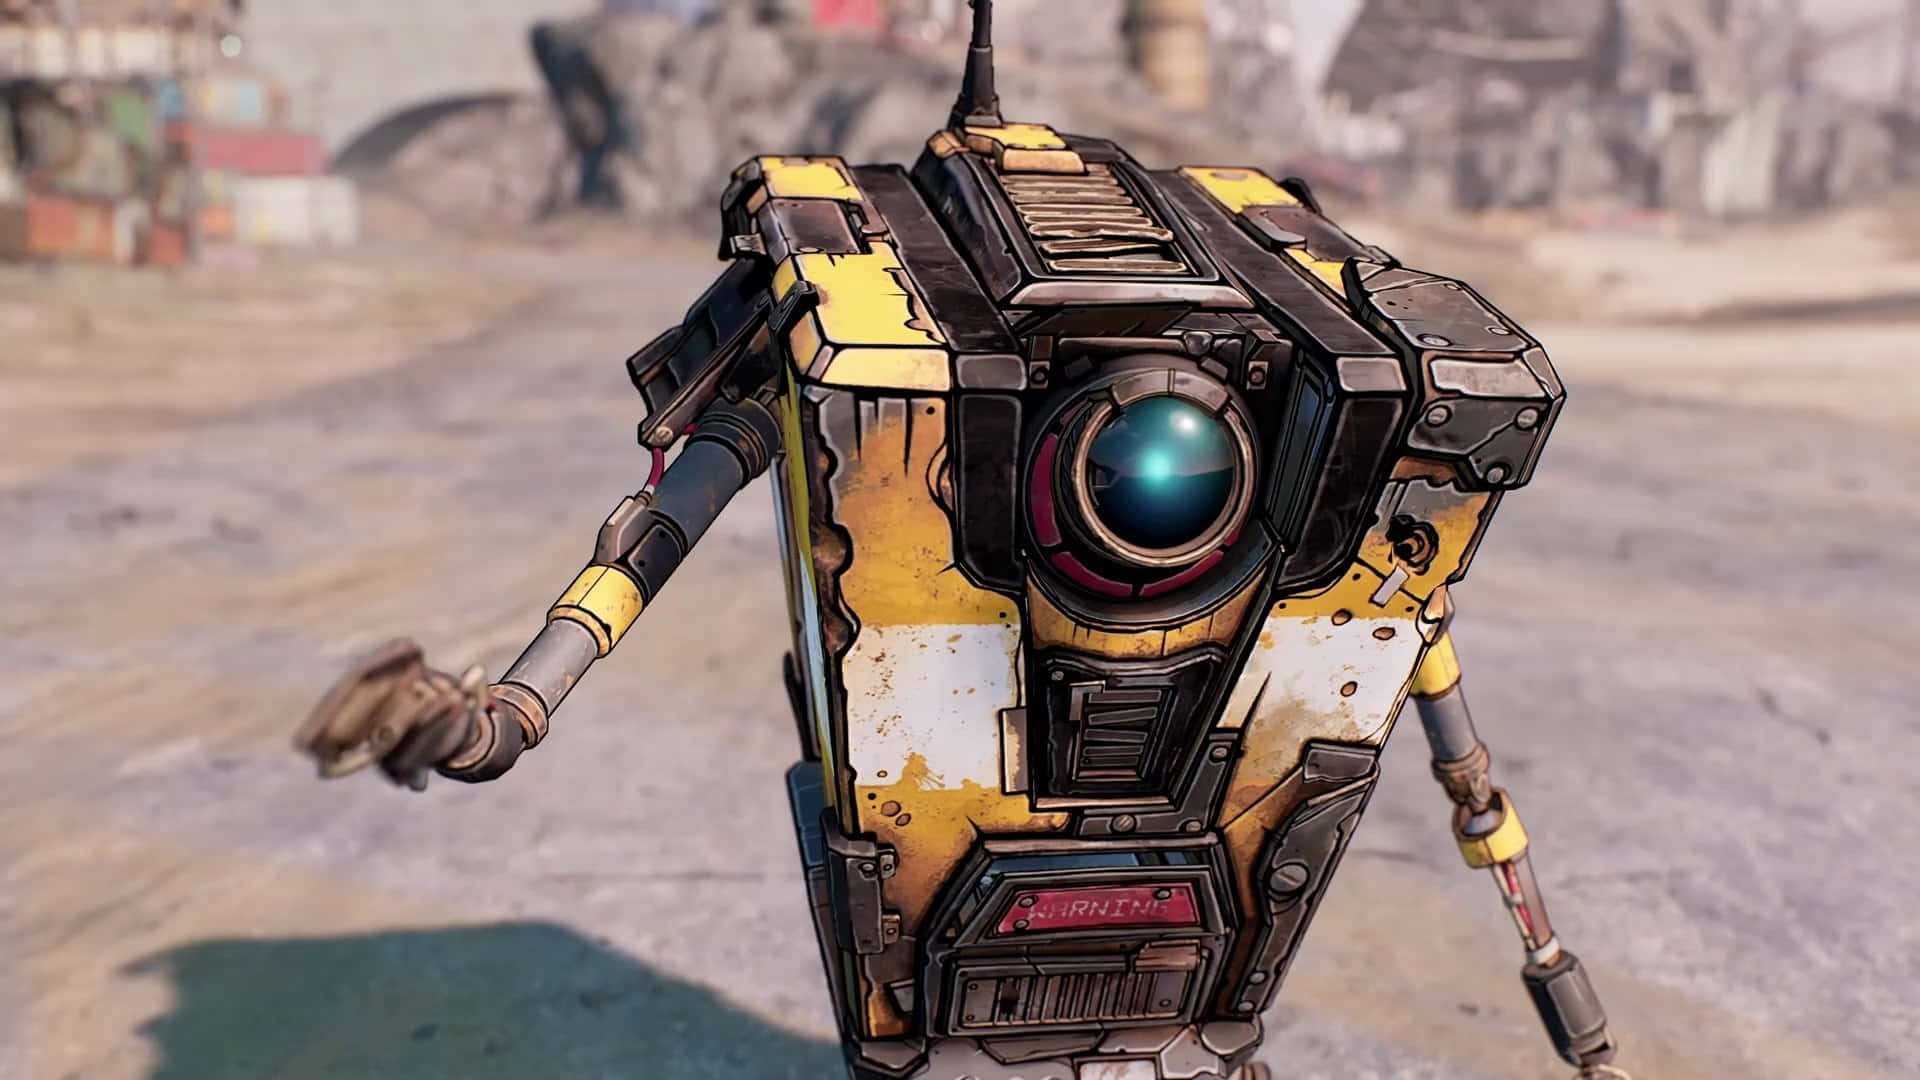 Experience Borderlands 3 in Stunning 1080p Resolution